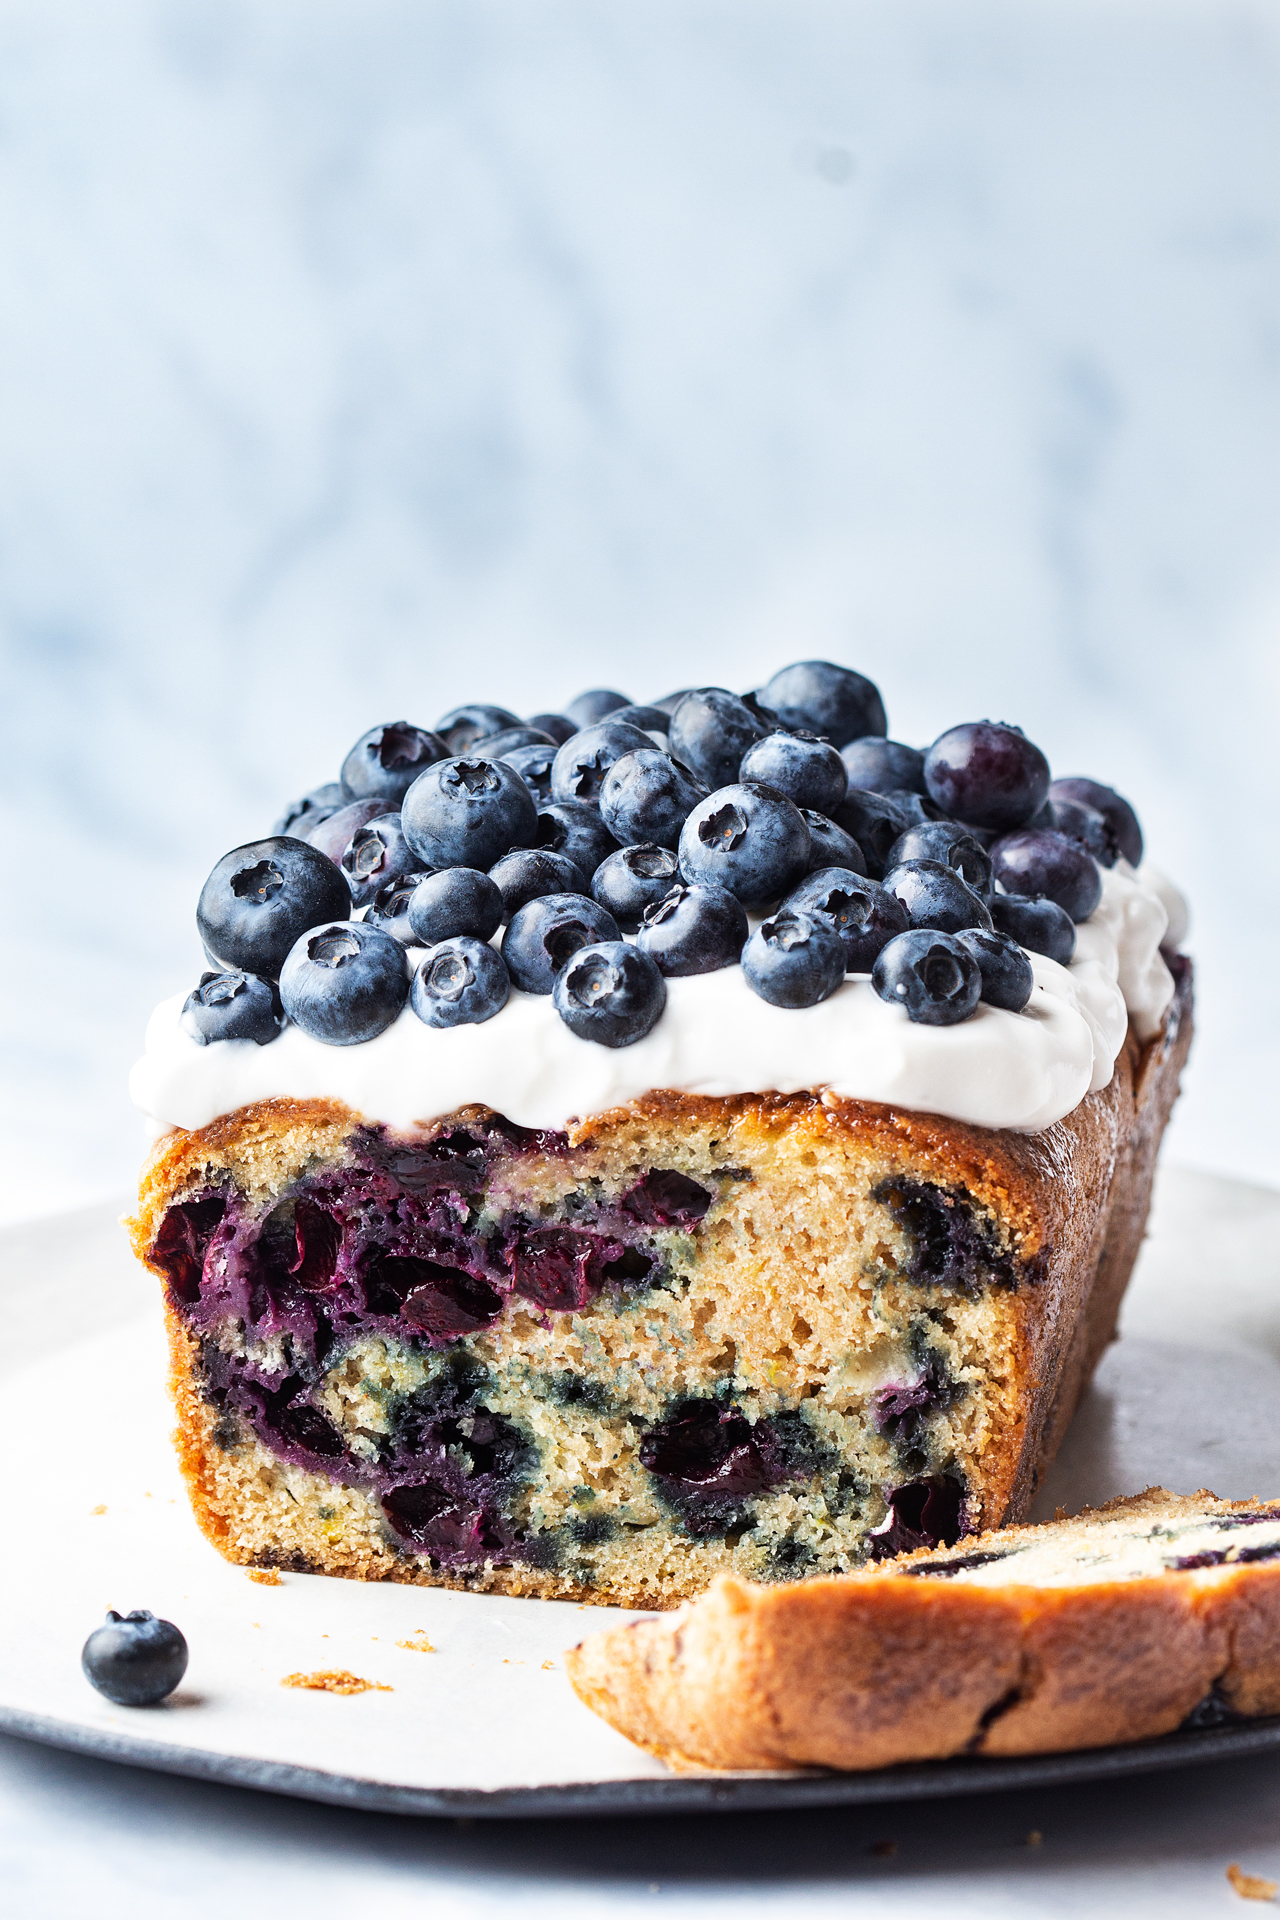 Lemon Blueberry Bundt Cake • The View from Great Island